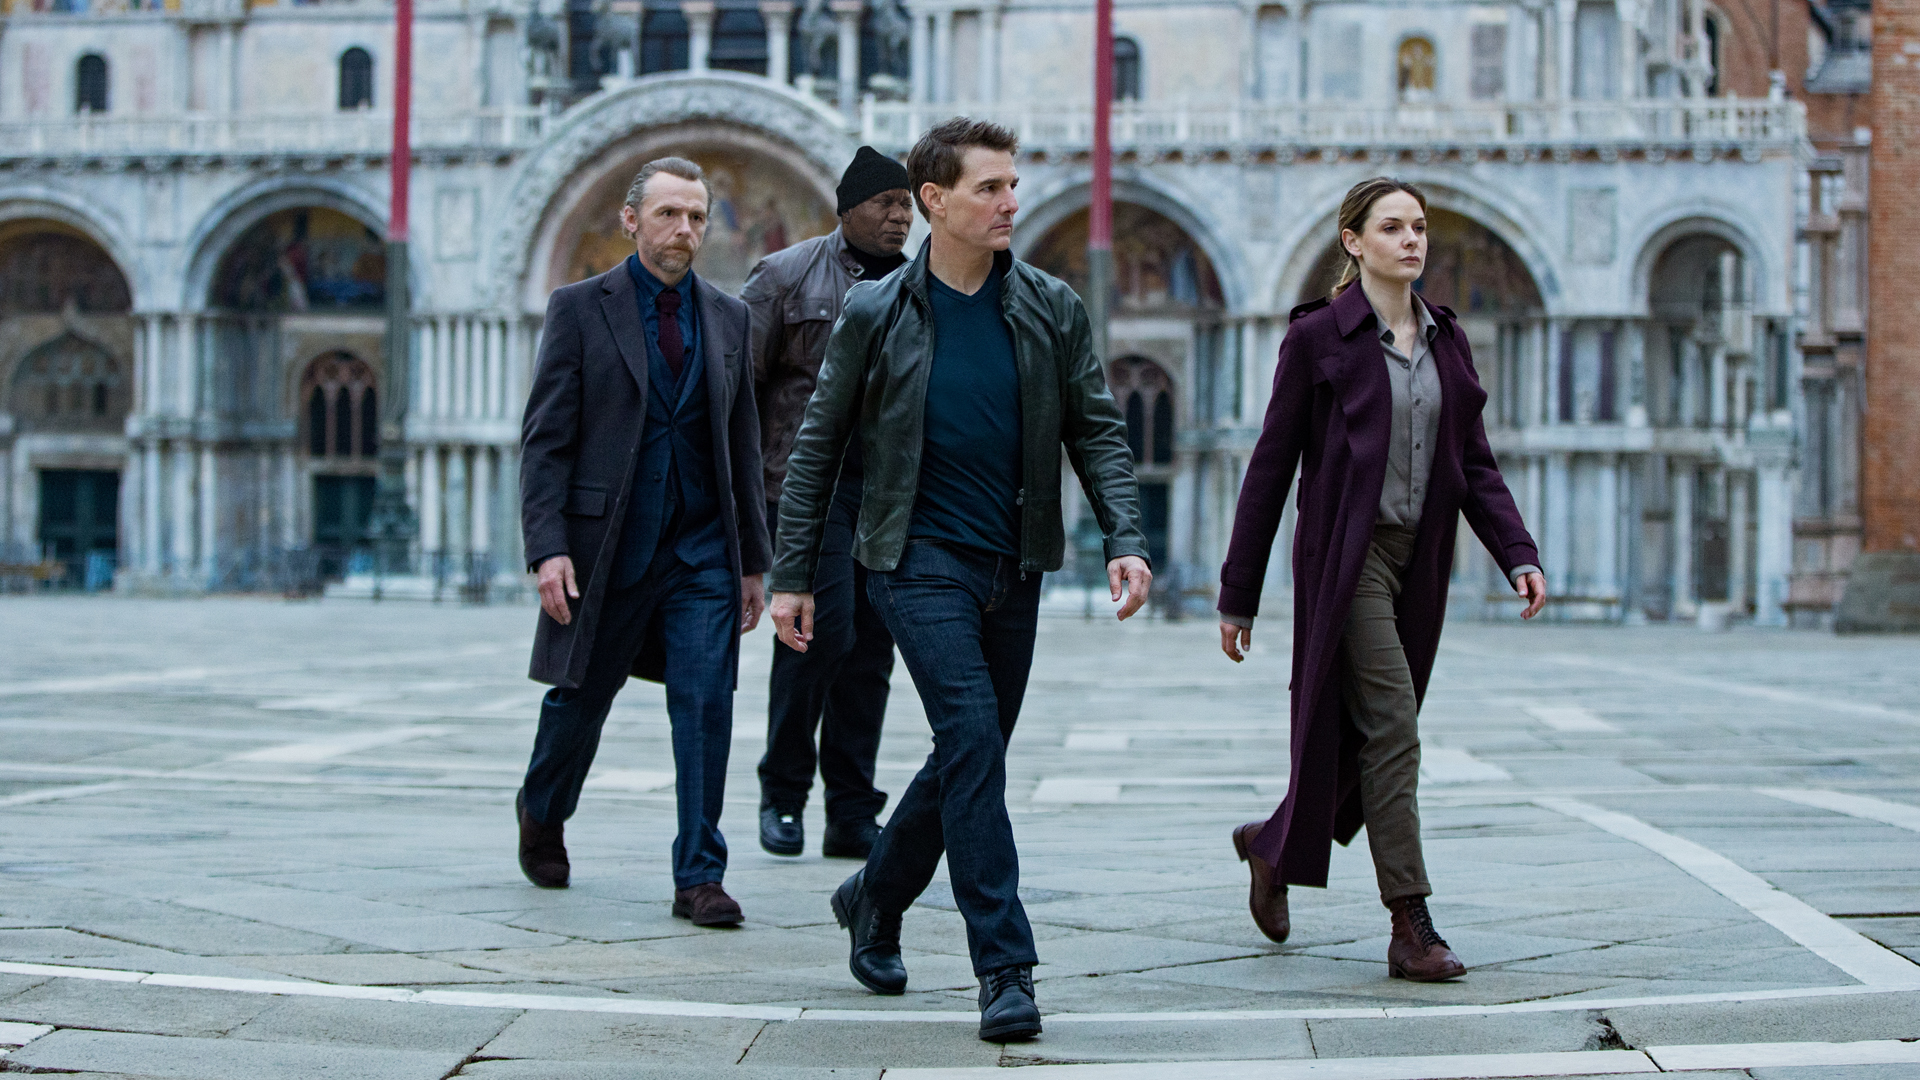 Ethan Hunt leads his IMF team across a plaza in Mission Impossible 7